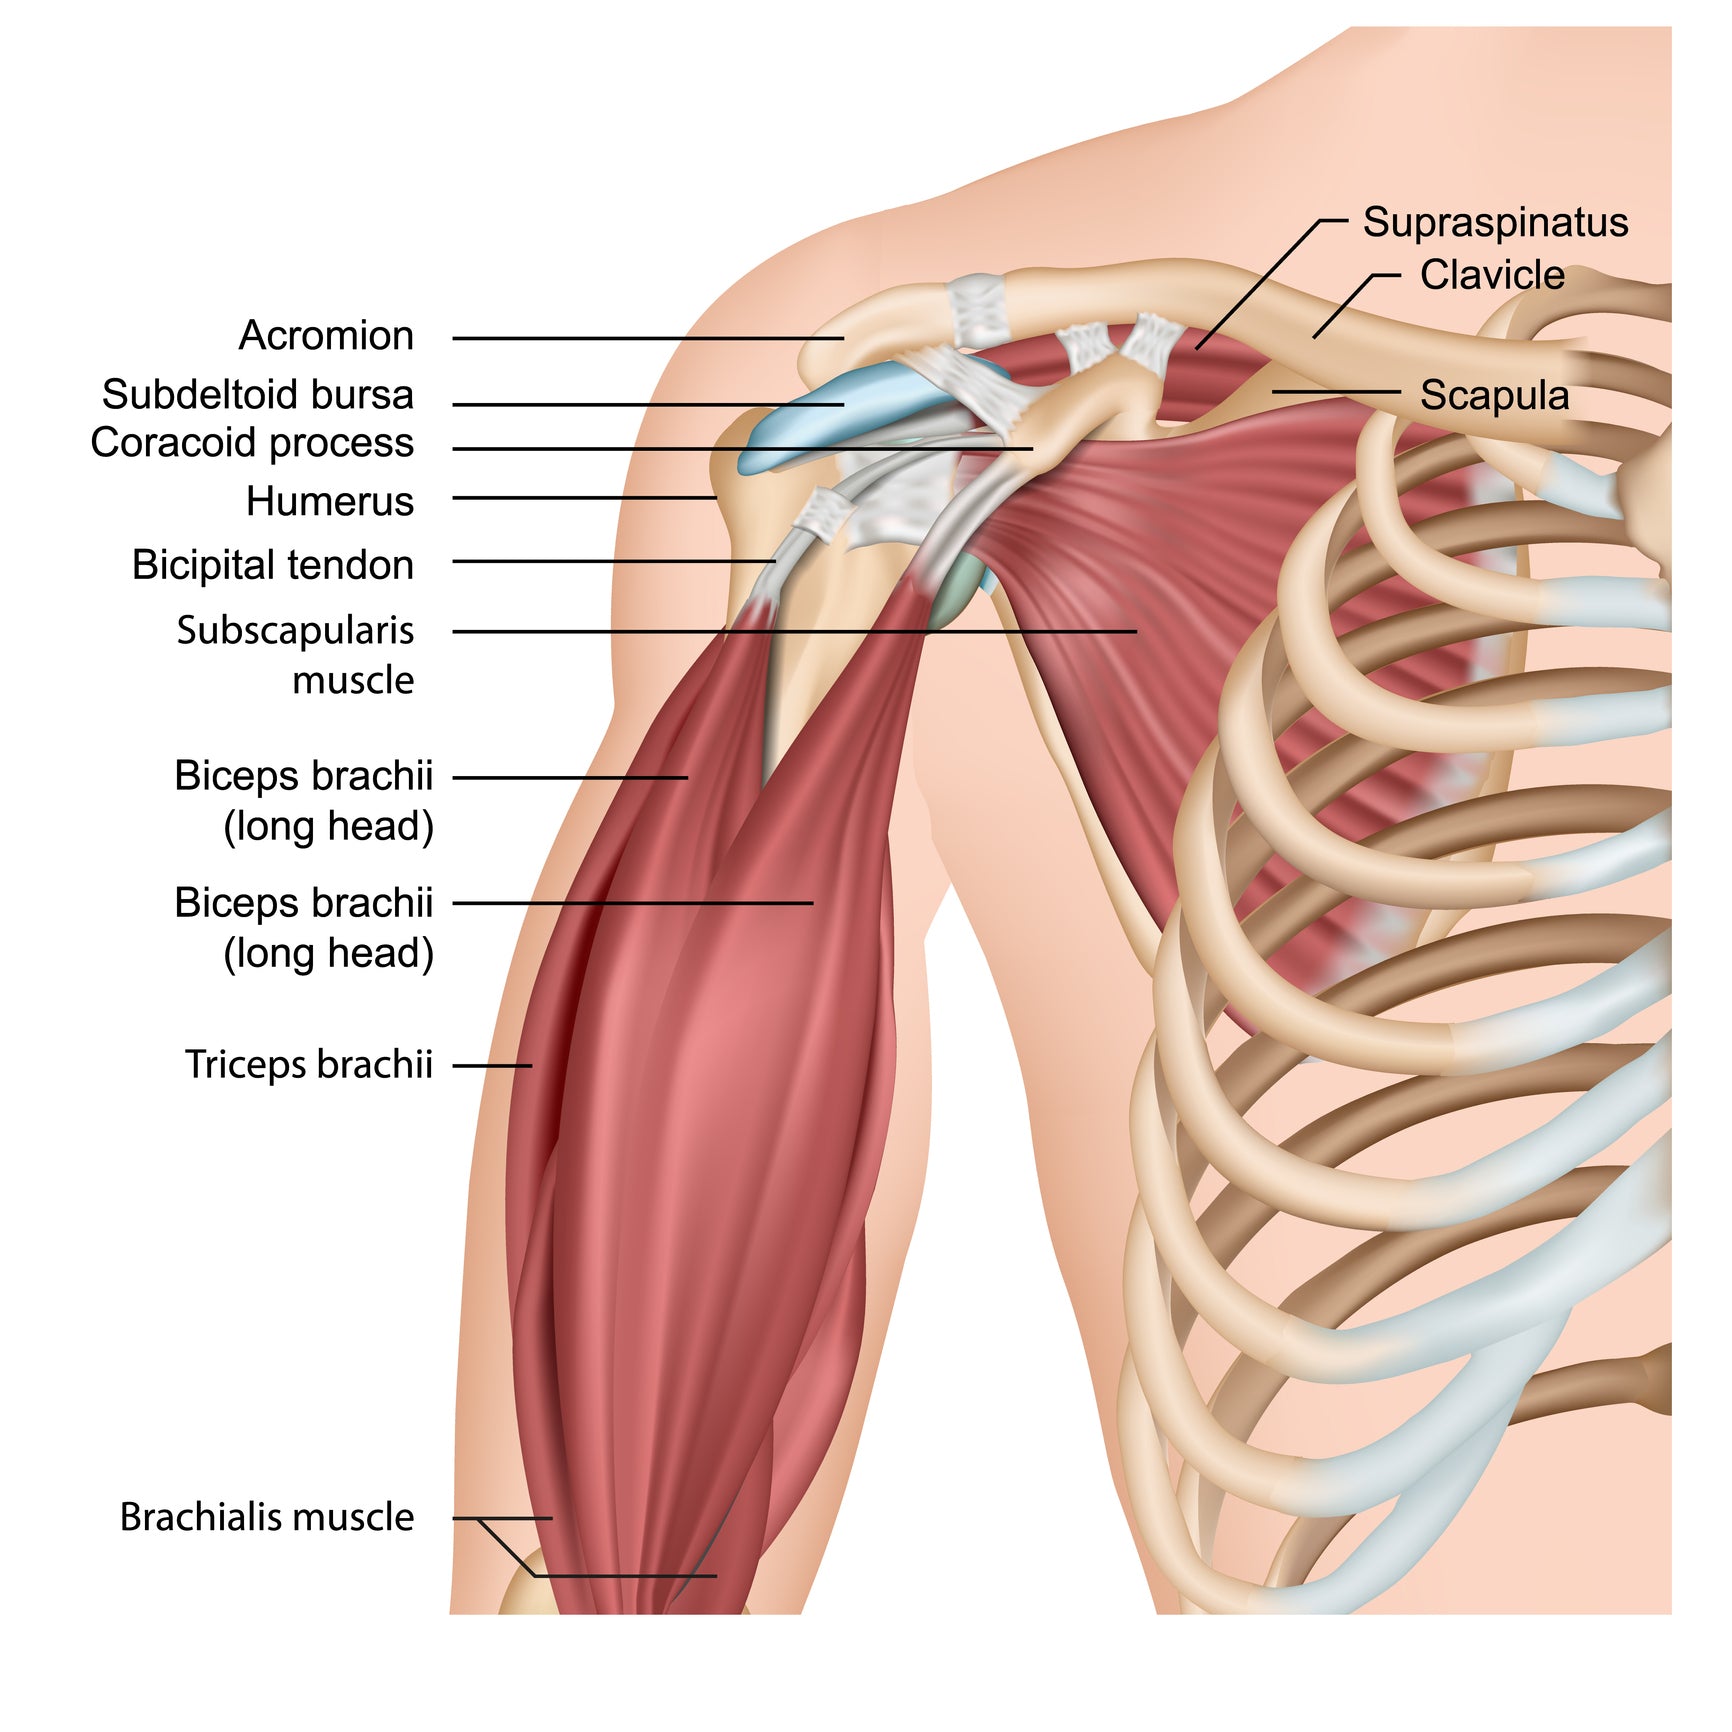 Treating Trigger Points in the Biceps, Biceps Brachii and more